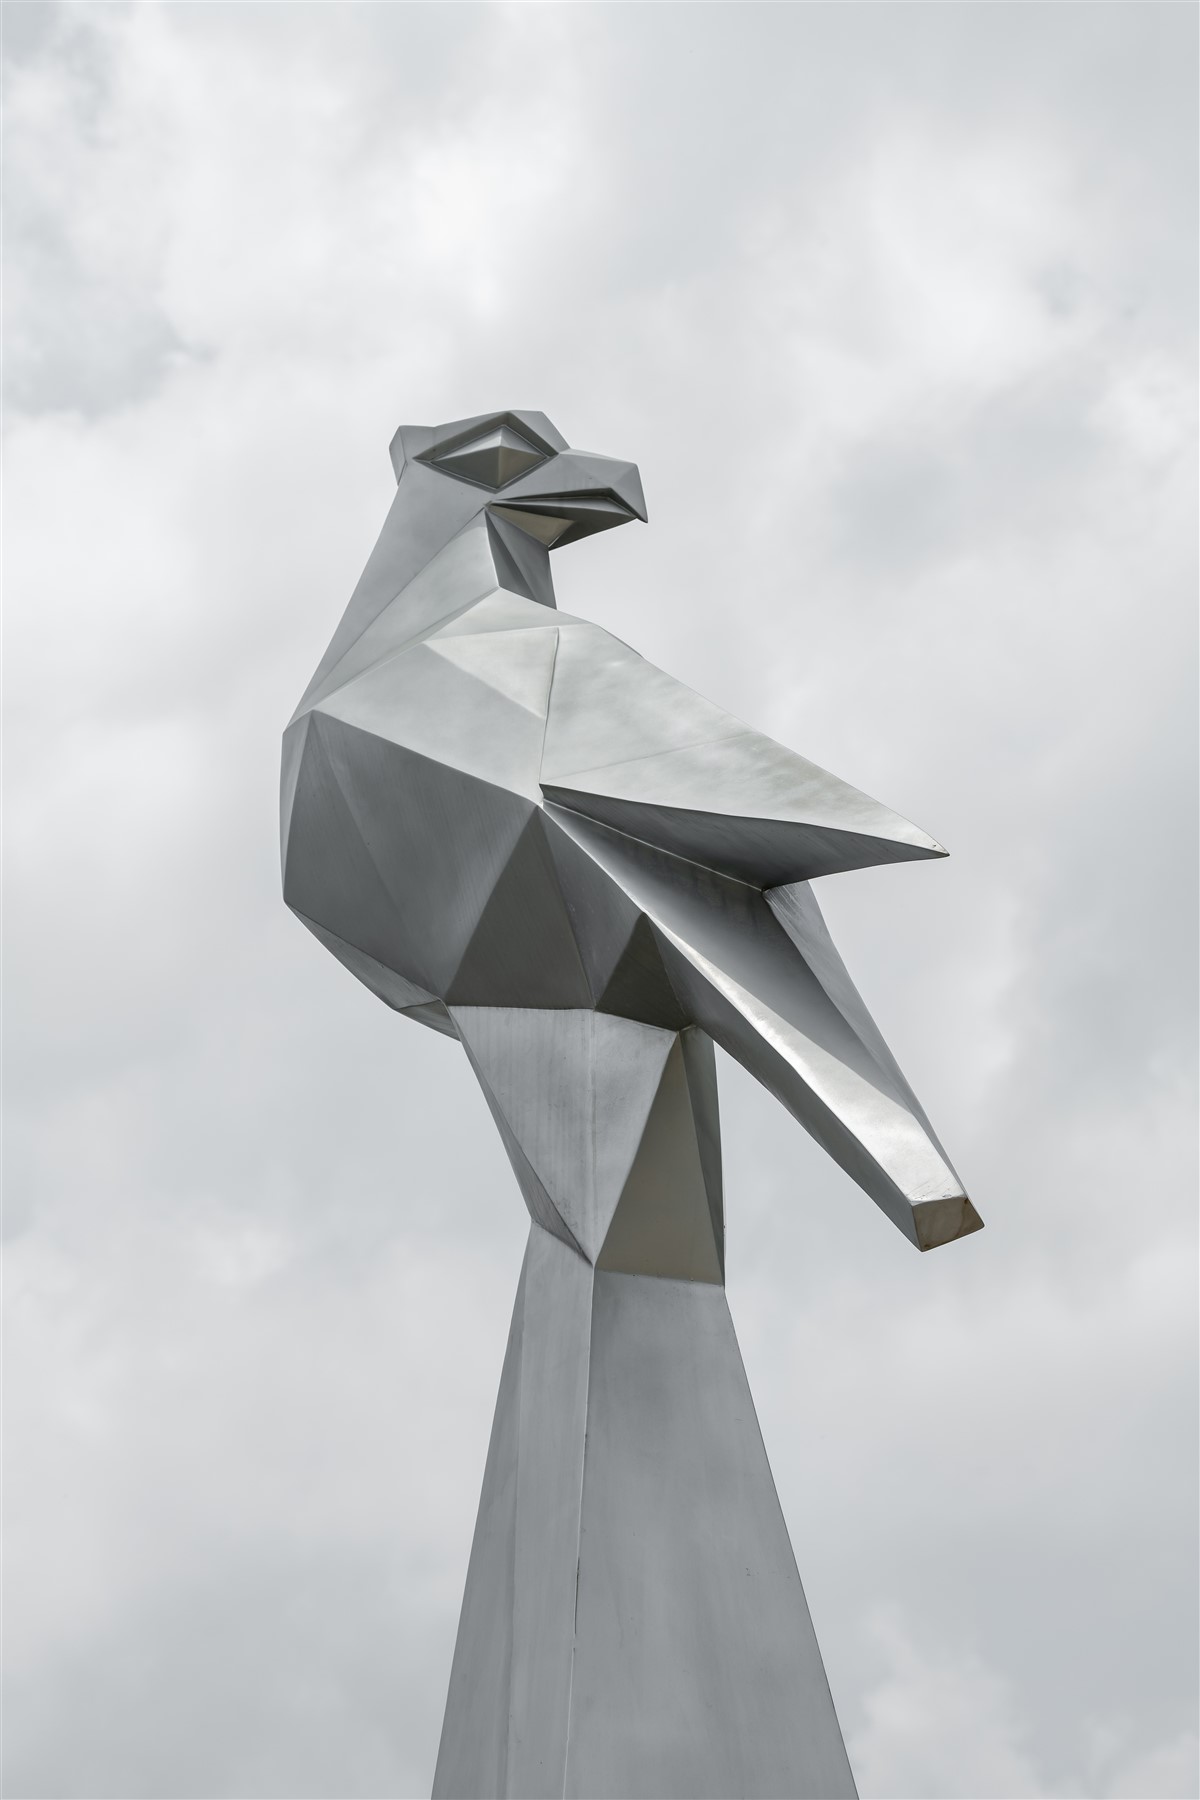 Falcon Stainless Steel Sculpture